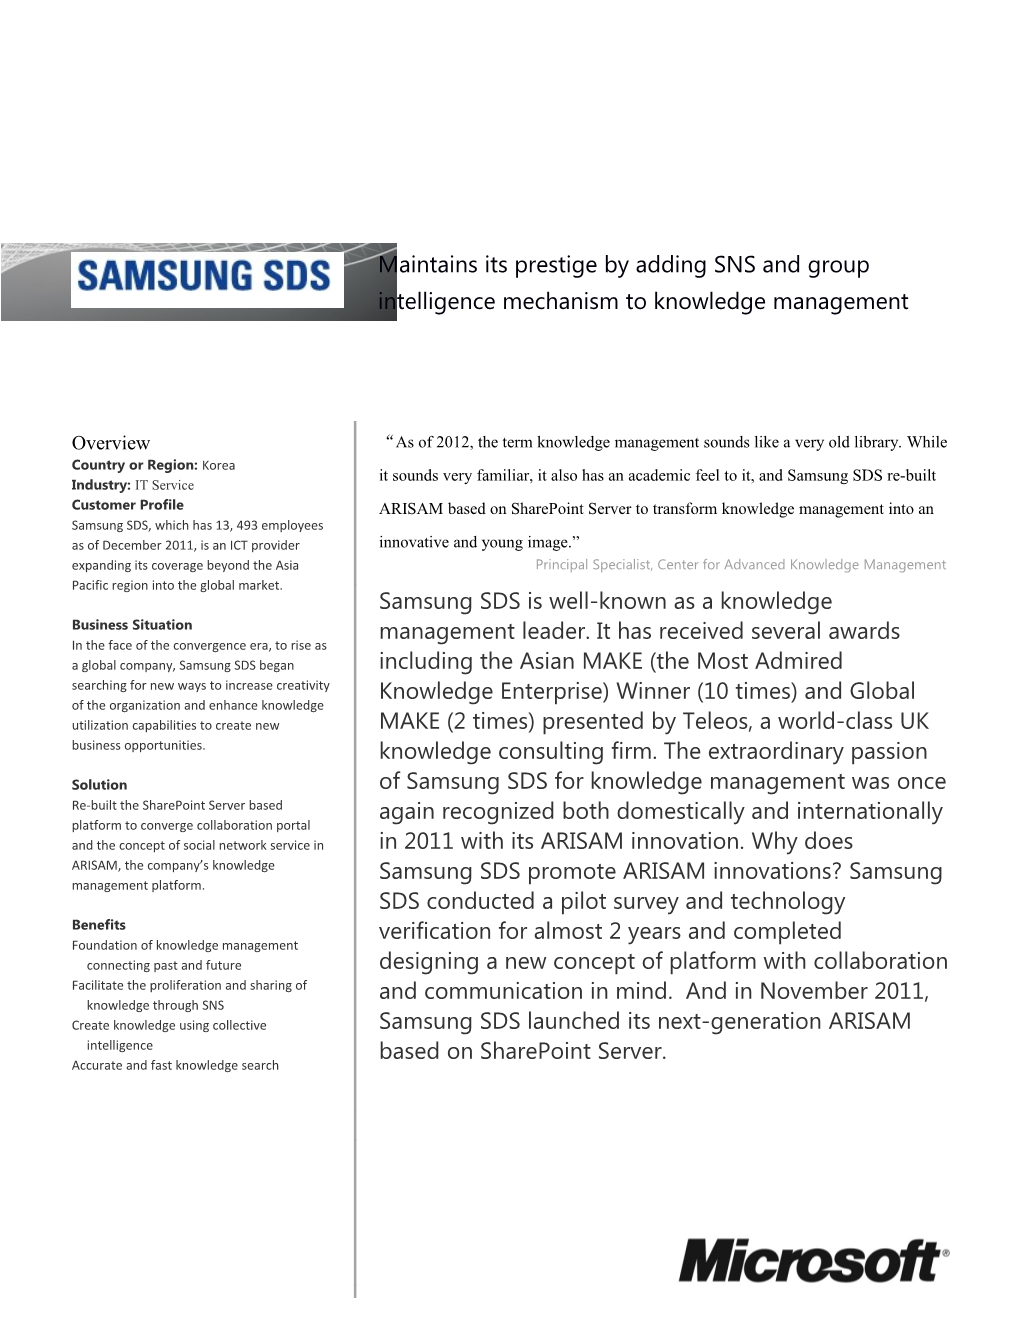 As Samsung SDS Entered the 21St Century and Faced Changes in Business Environment, It Began